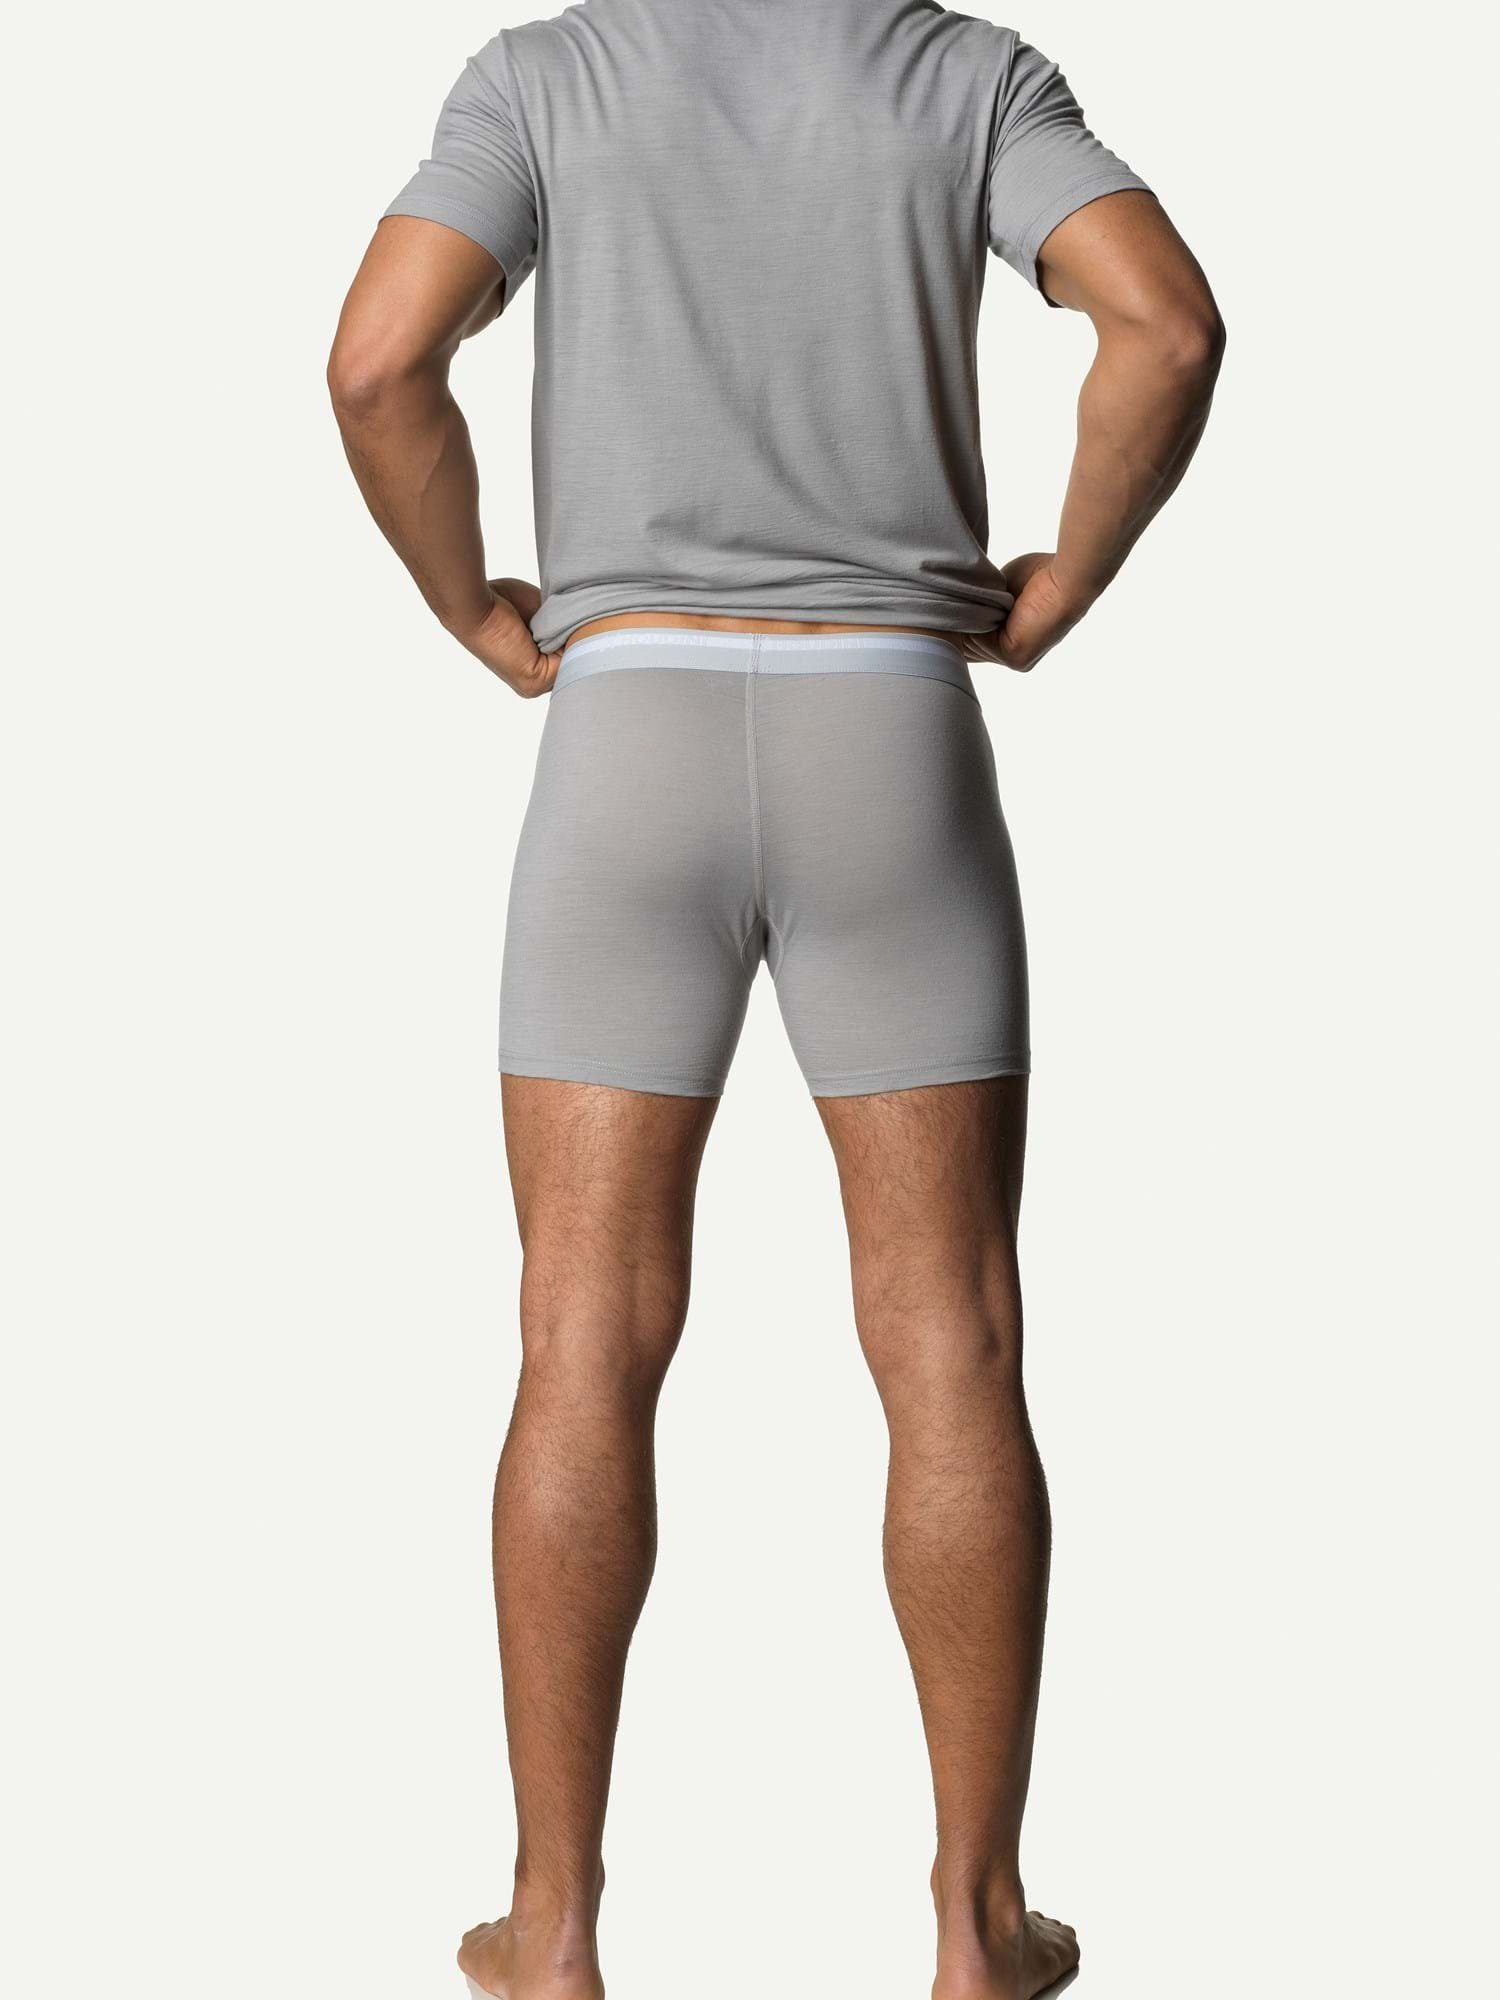 Cloudy Gray Desoli M's Funktionstights Houdini Boxers